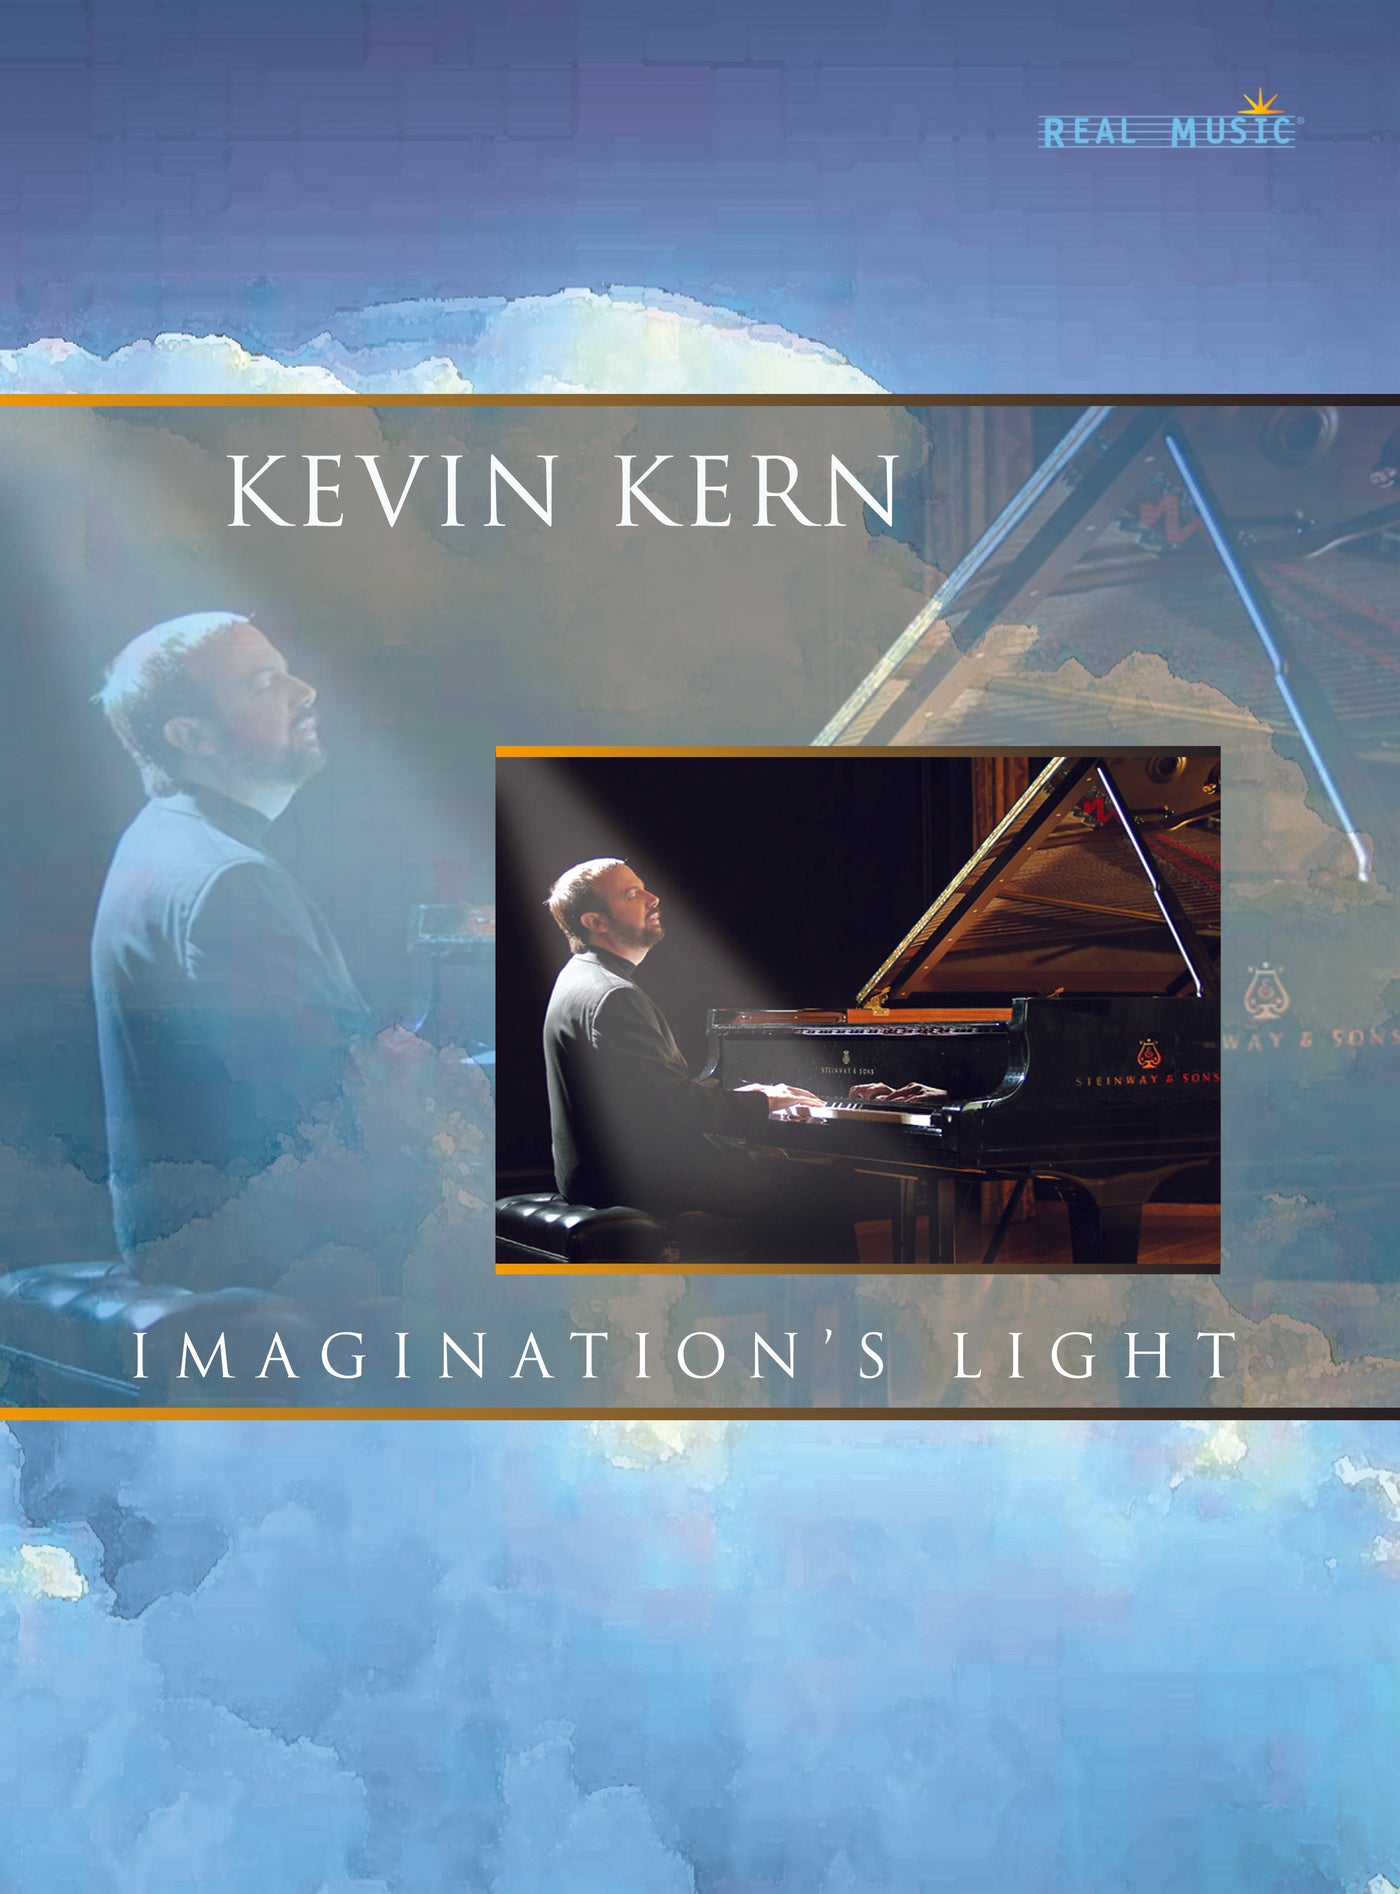 Imagination's Light Songbook by Kevin Kern, cover.